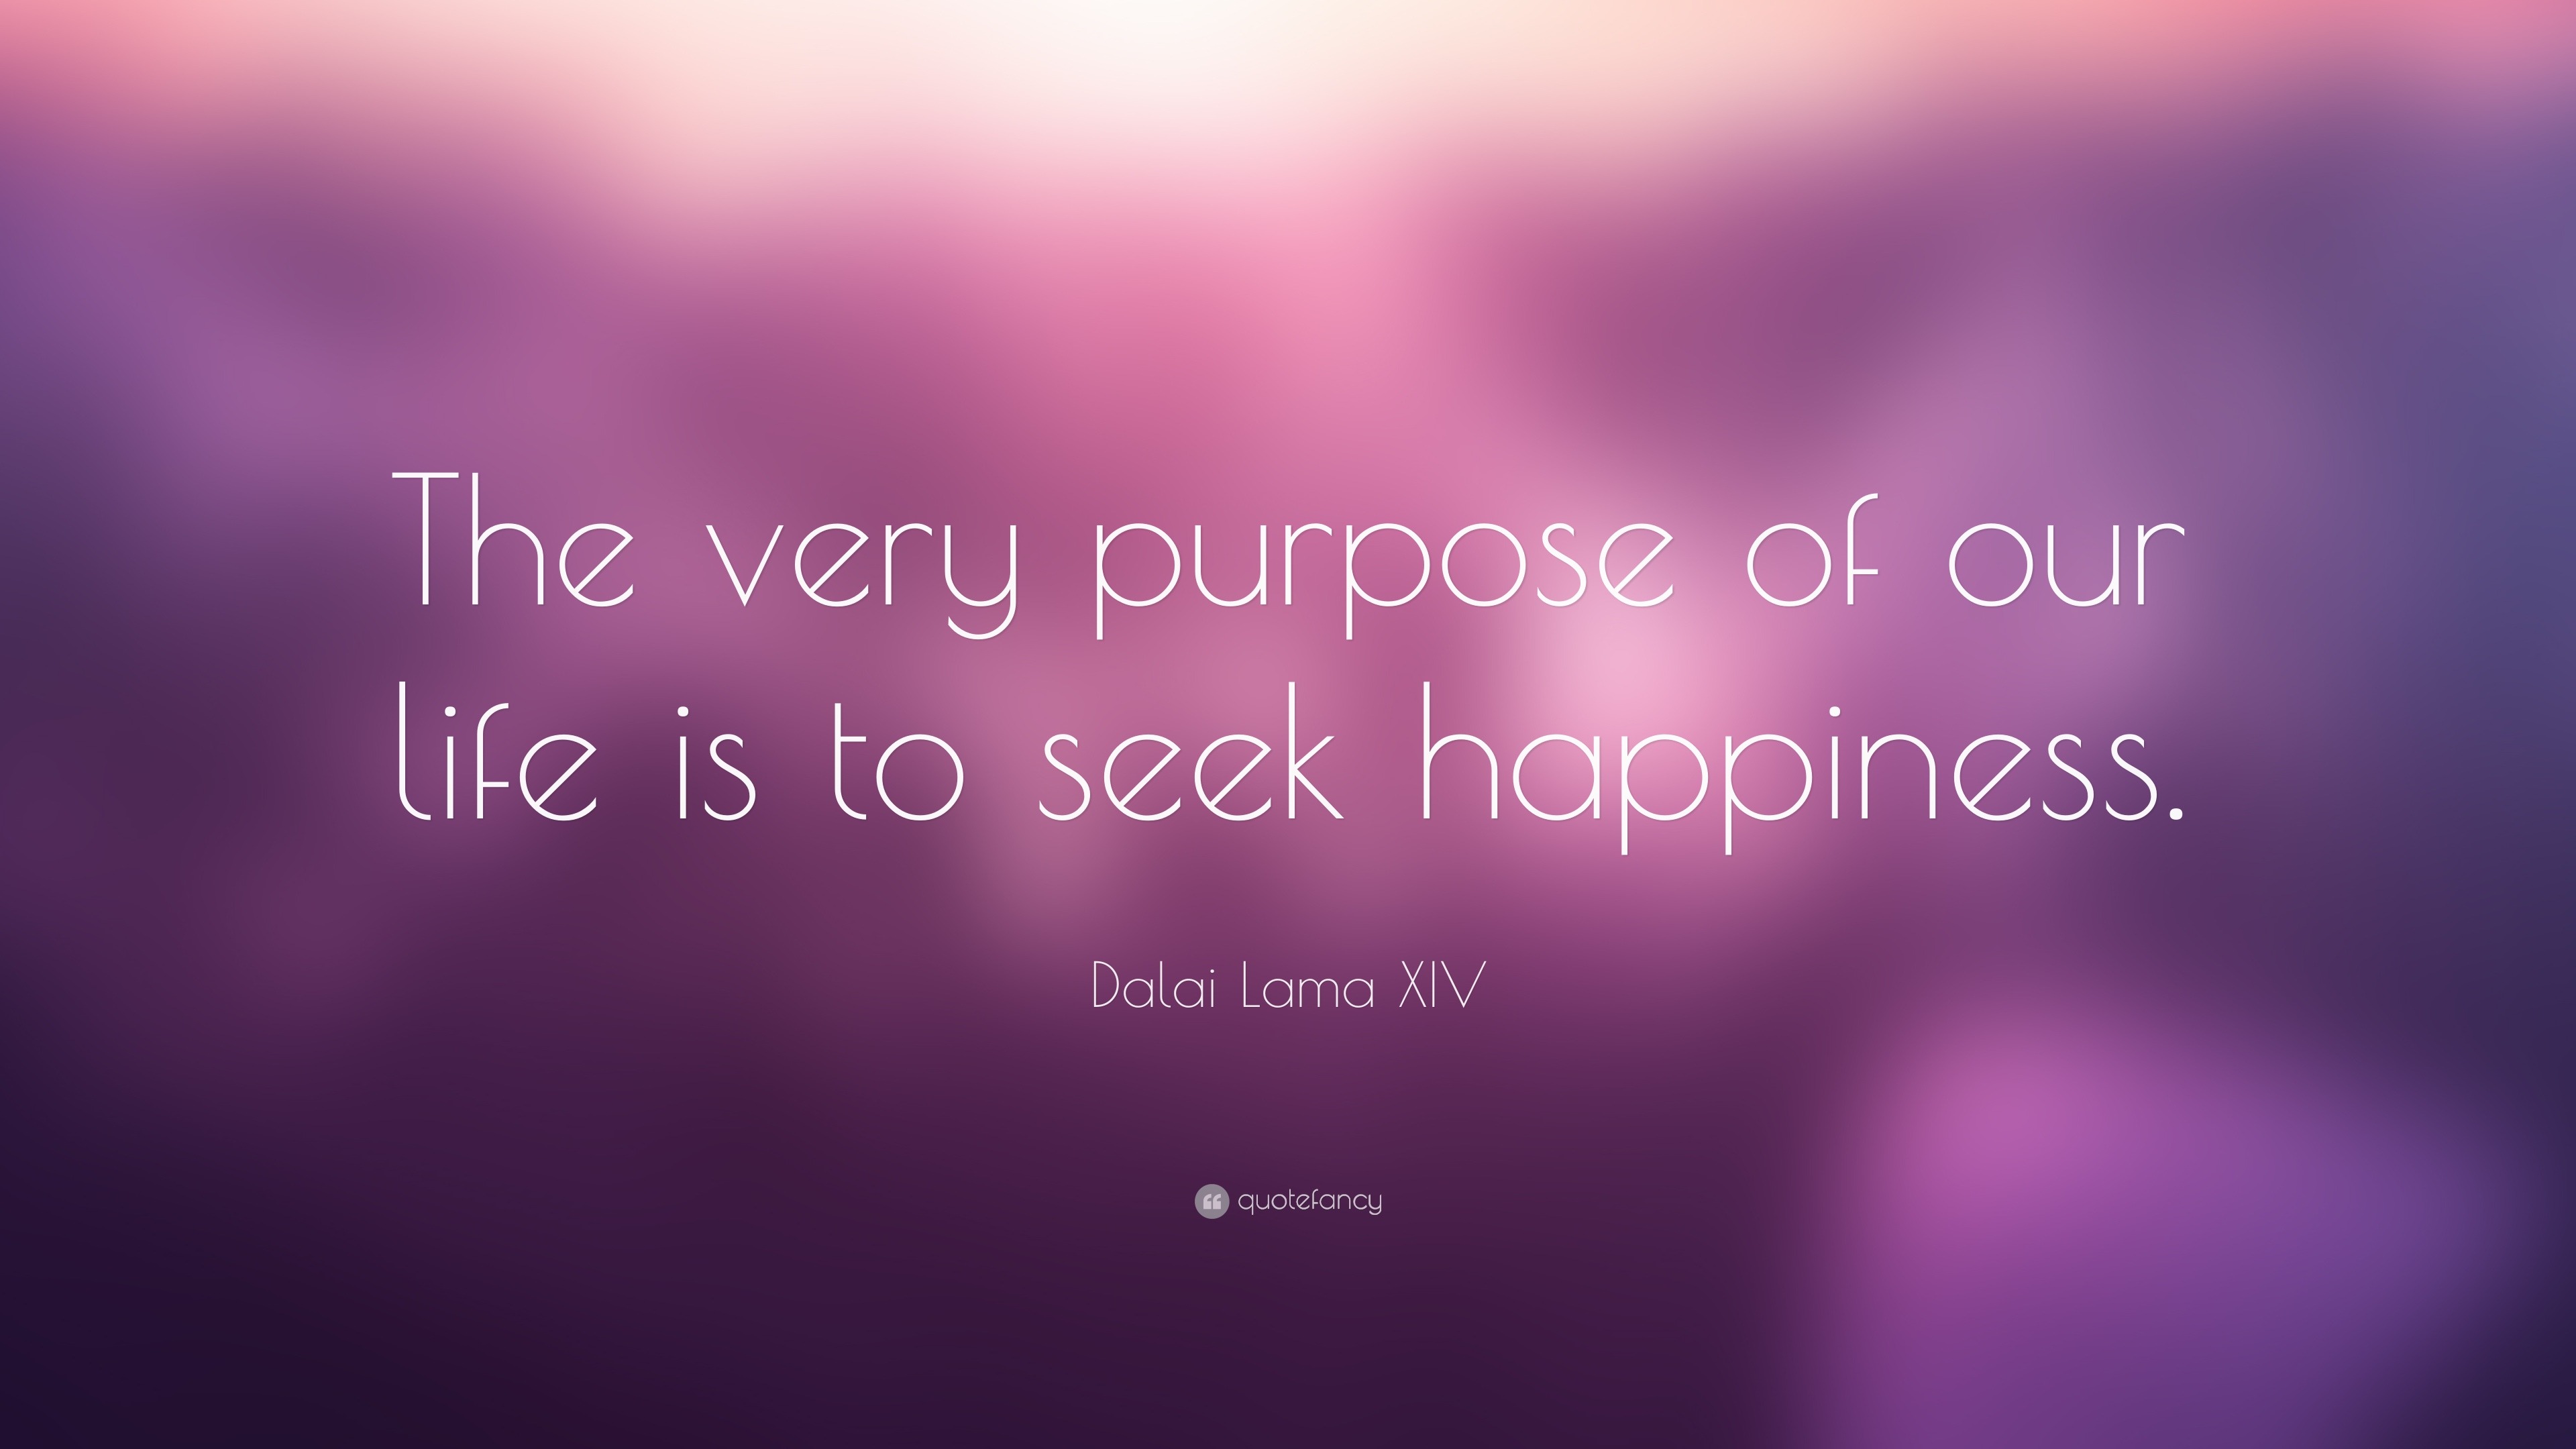 Dalai Lama XIV Quote: “The very purpose of our life is to seek happiness.”